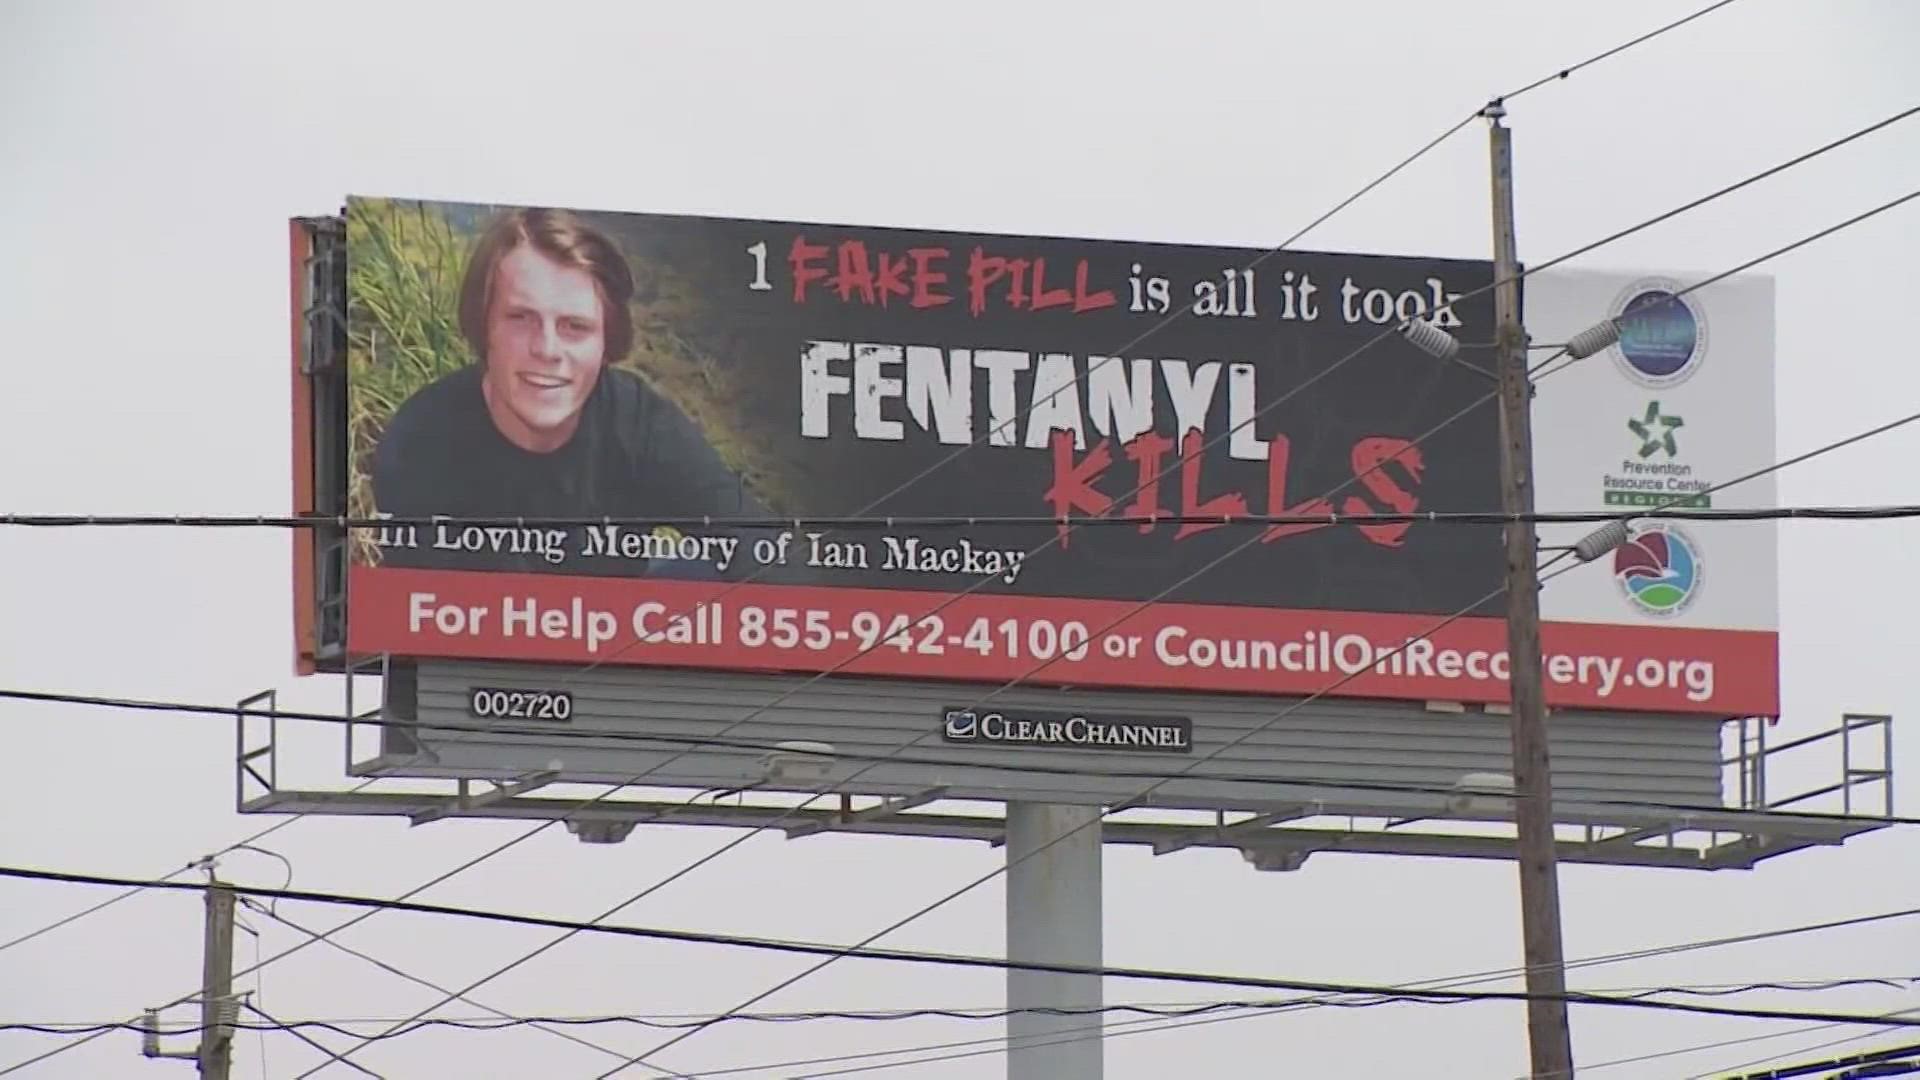 Fentanyl: One pill kills  Department of Public Safety